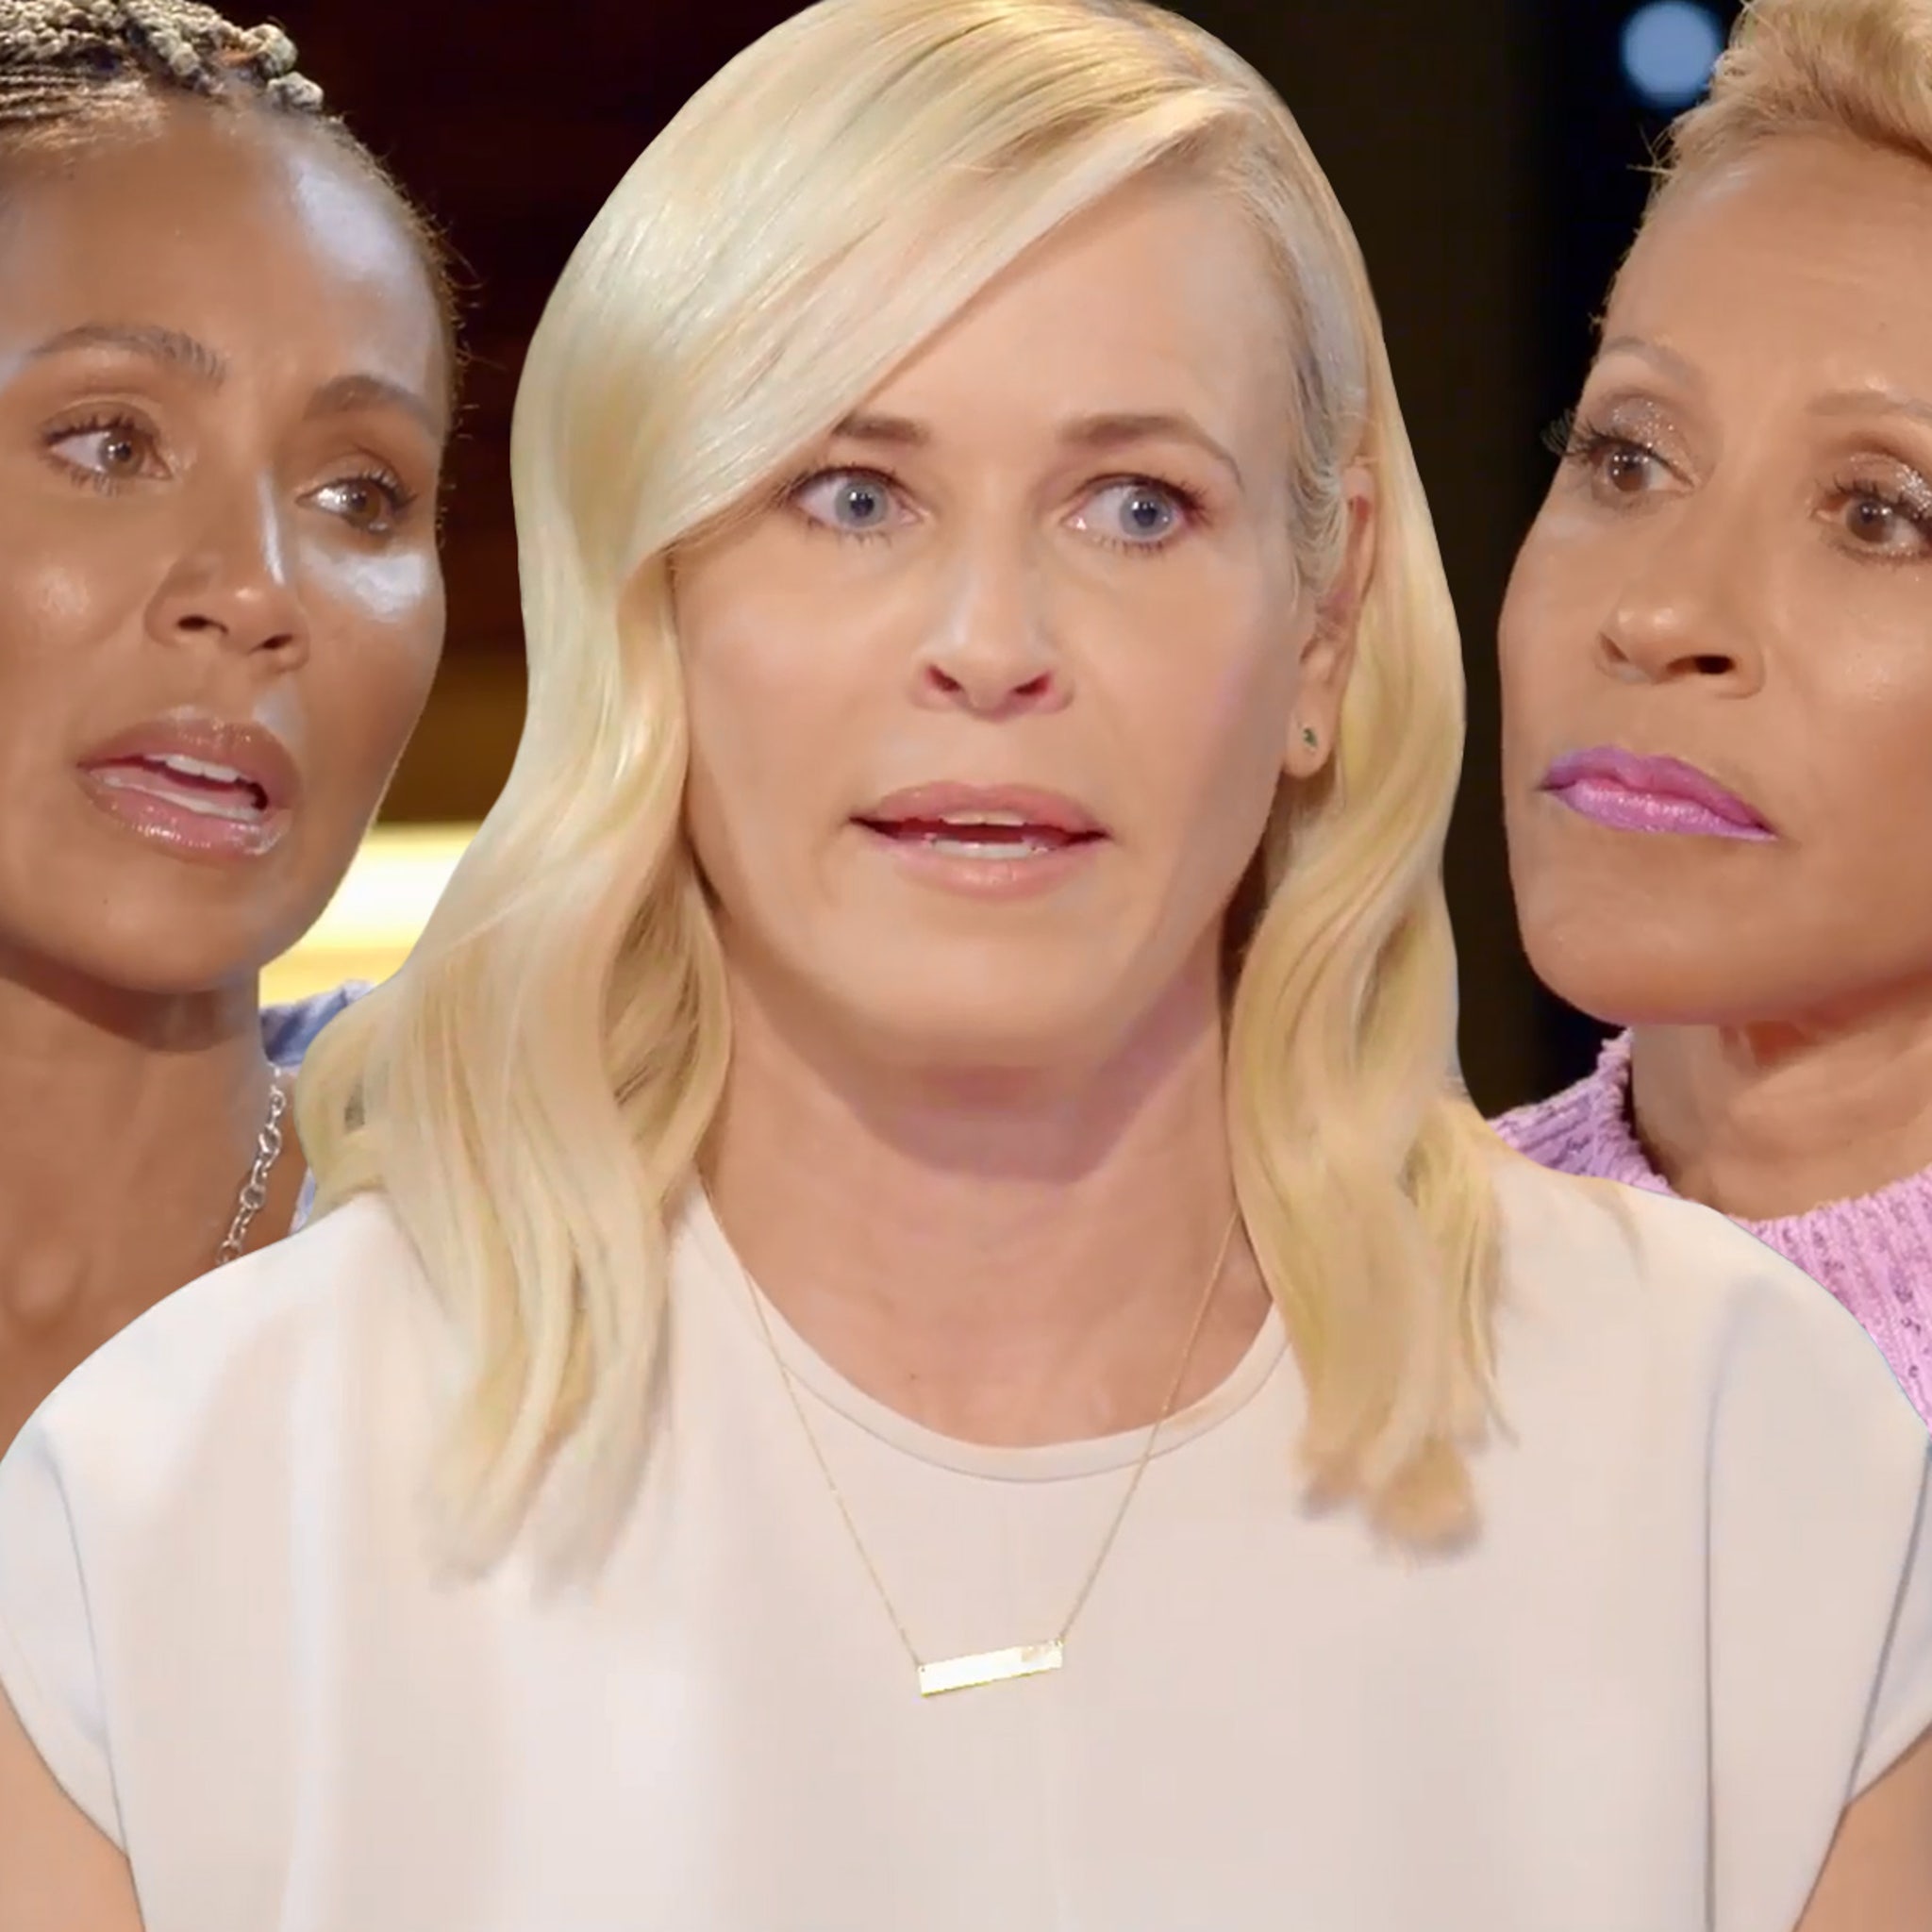 Jada Pinkett Smith, Mom and Chelsea Handler Have Raw 'Red Table All About White Privilege